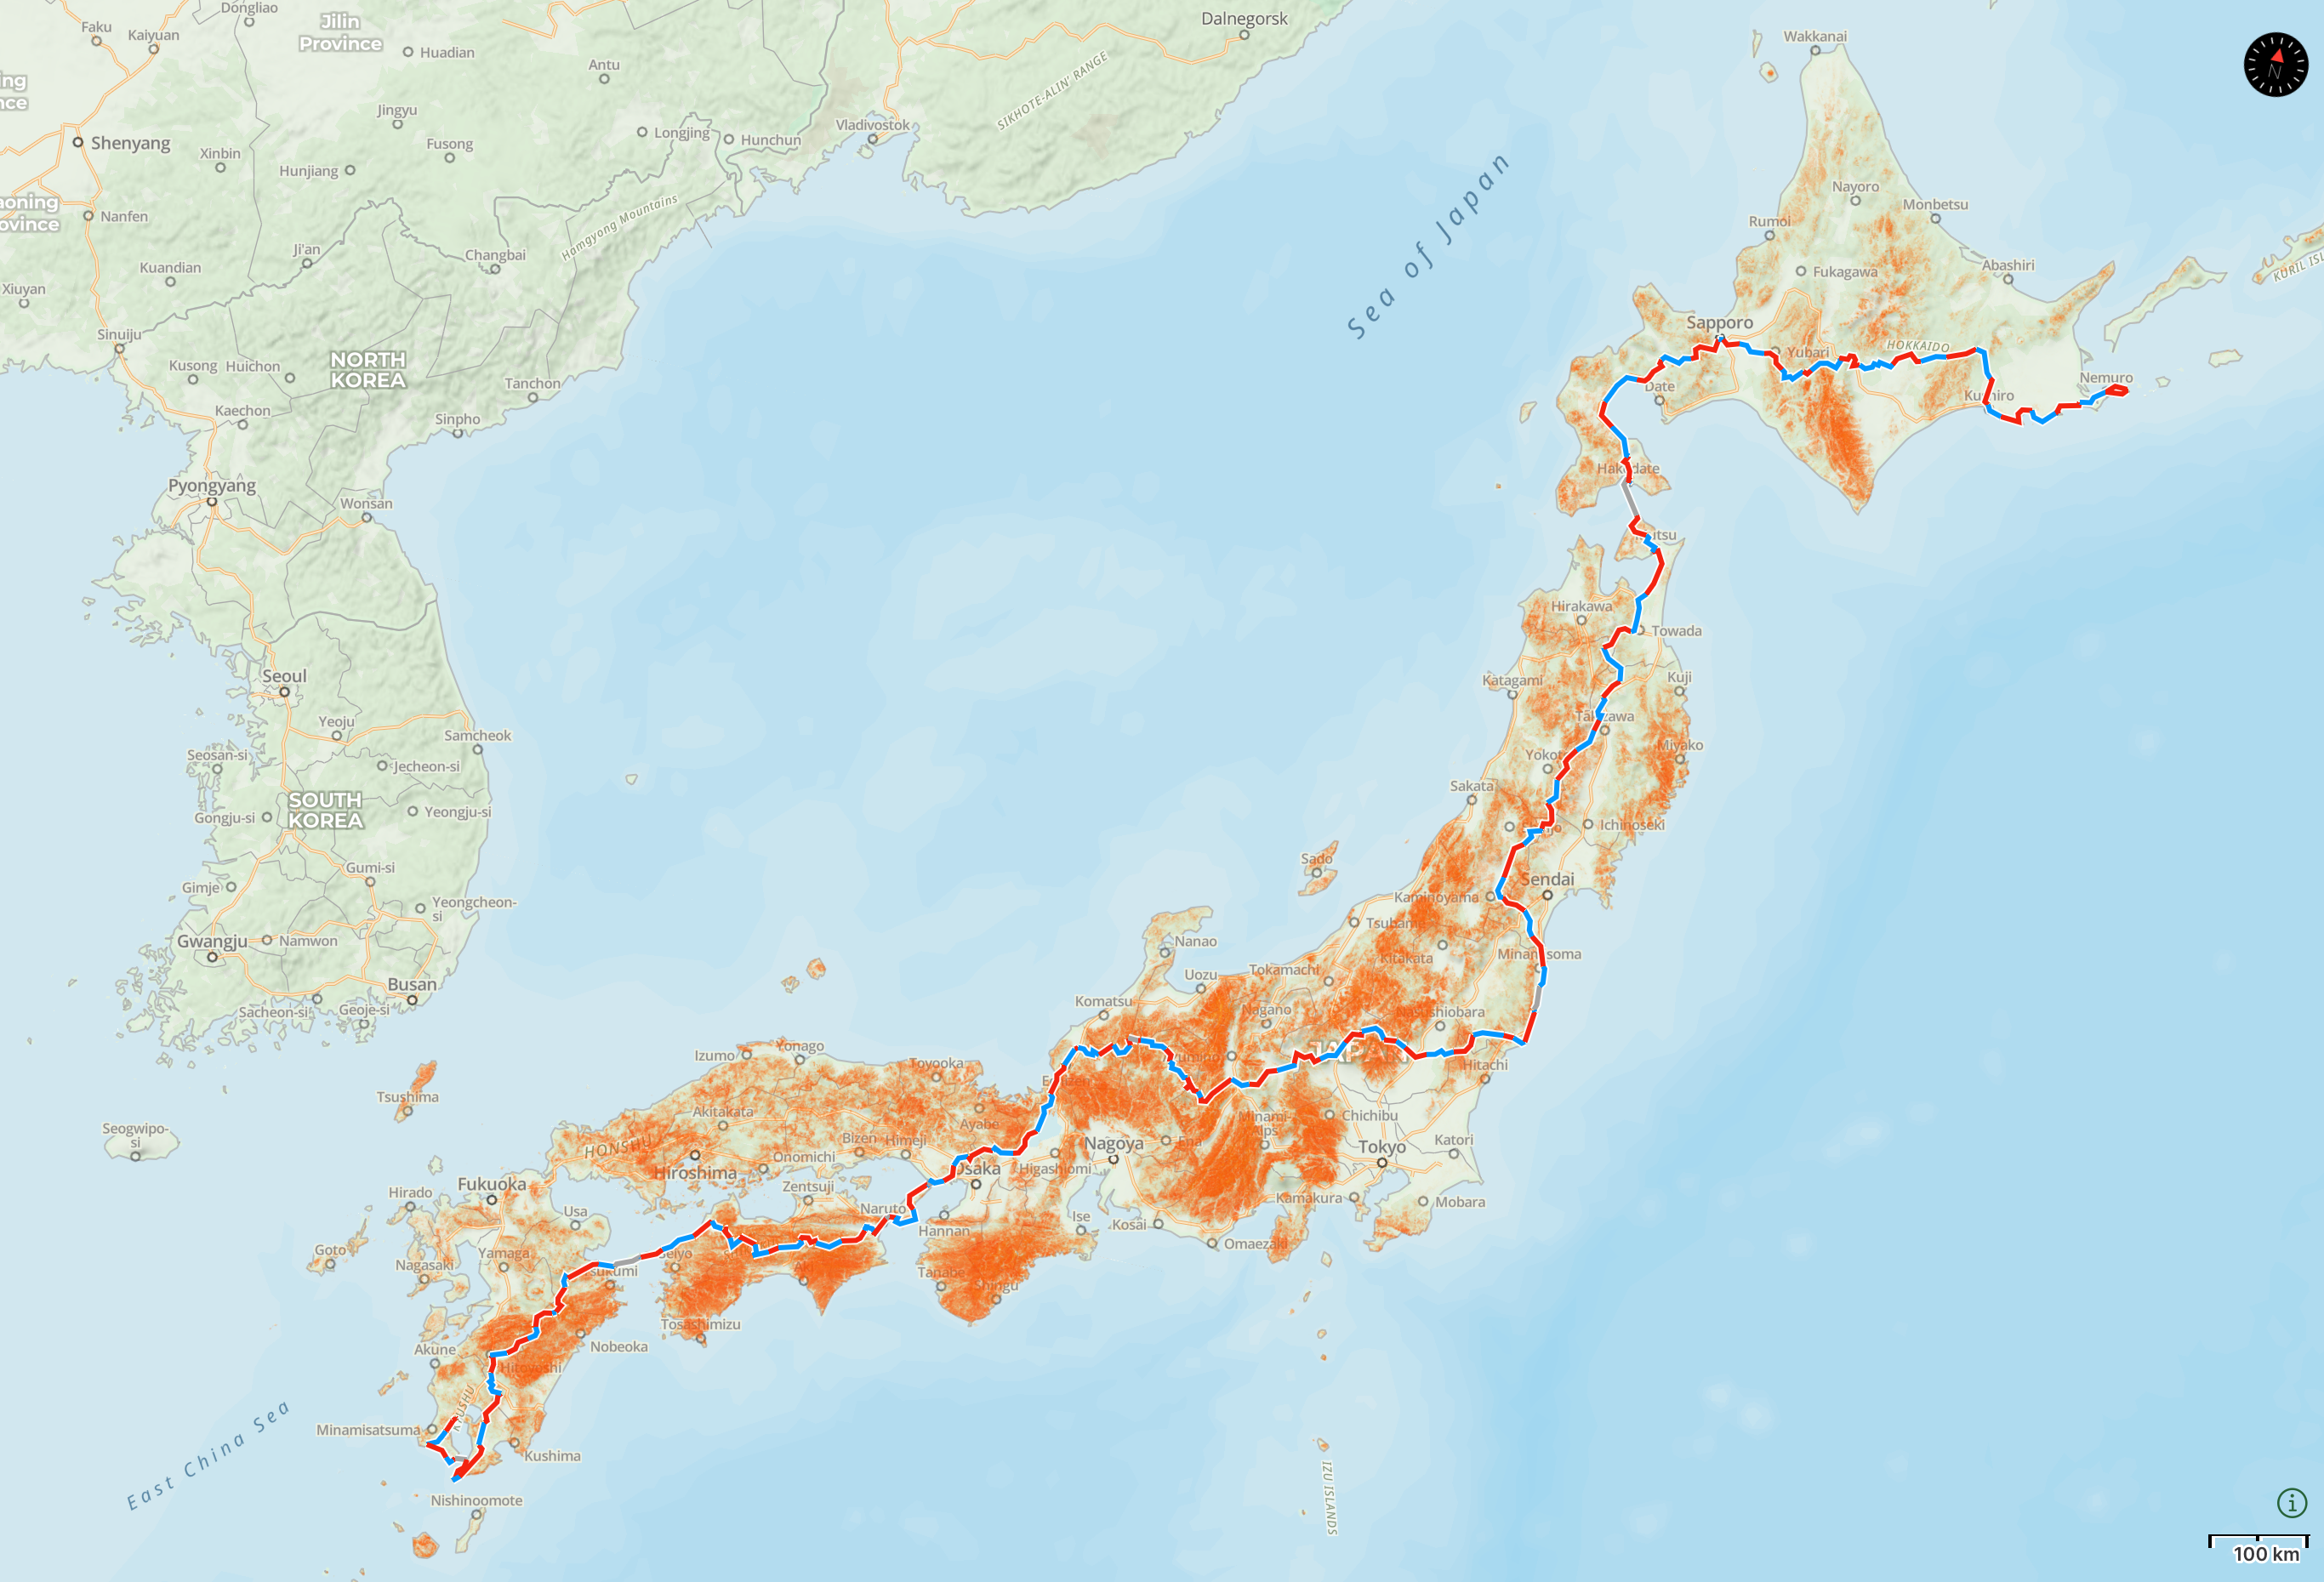 Map of Japan with the route I walked in 2017 highlighted.